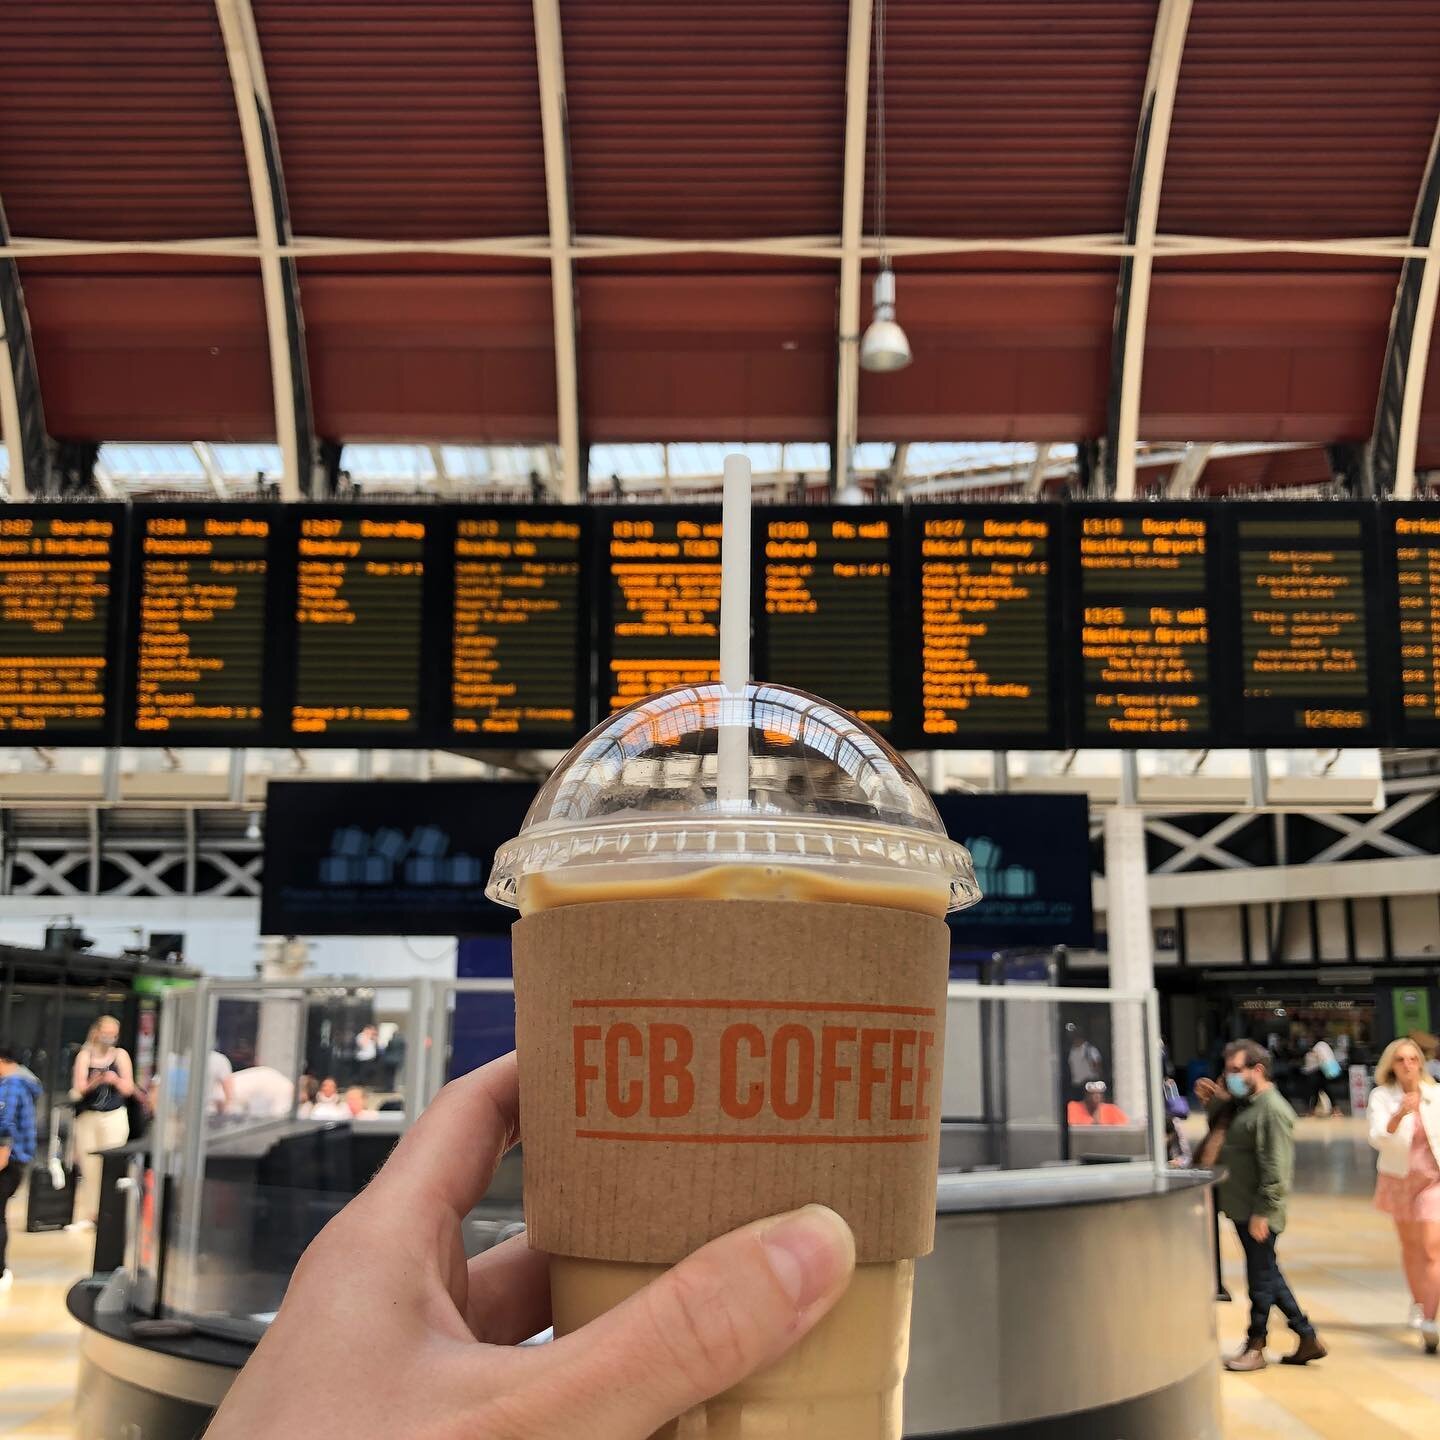 The best companion for any train journey wherever you are travelling. 

We have been open in Paddington for a week now, if you haven&rsquo;t popped in to say hi yet please do. 

#coffee #paddington #travel #icedlatte